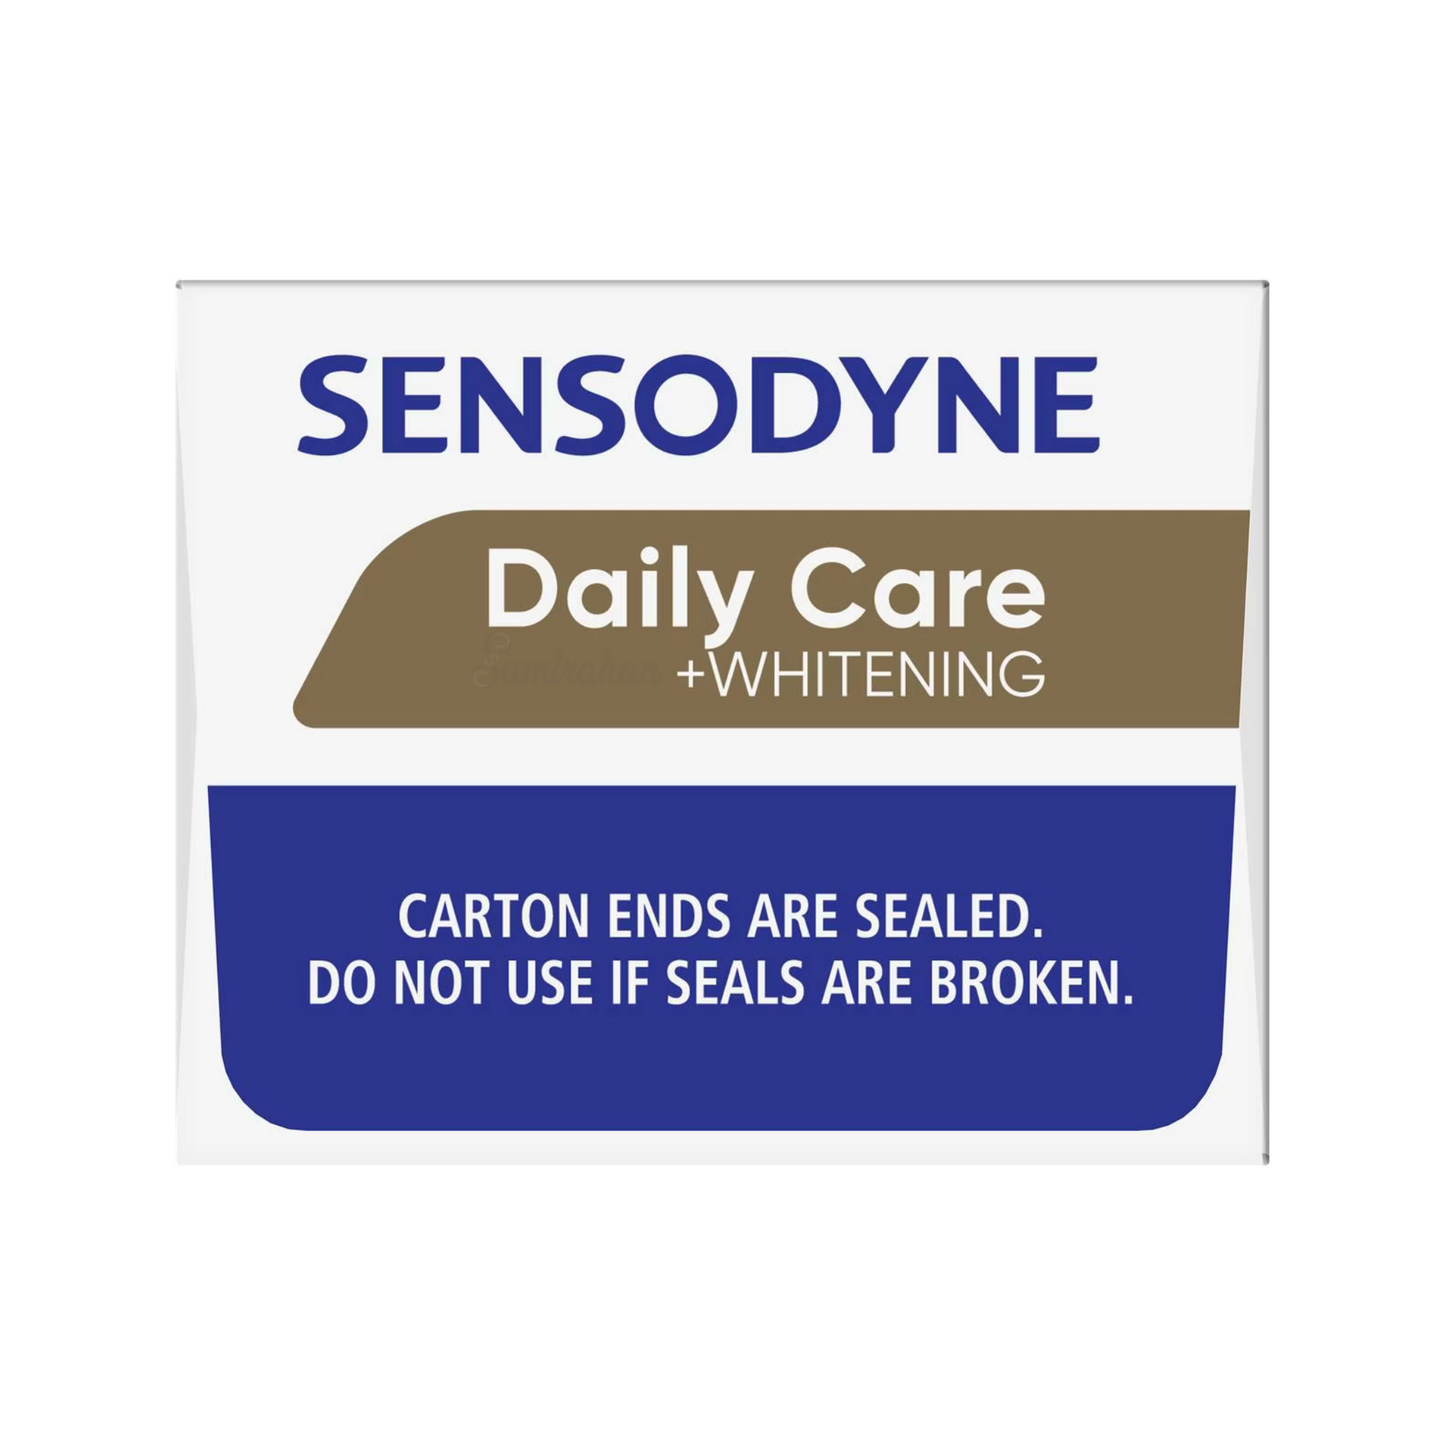 Sensodyne Daily Care And Whitening Toothpaste For Sensitive Teeth is specially formulated to relieve sensitivity. Best genuine authentic real imported foreign Australian American premium luxury safe quality healthy tooth dental white beautiful nice health toothpaste cheap price in Dhaka Chittagong Sylhet Bangladesh.